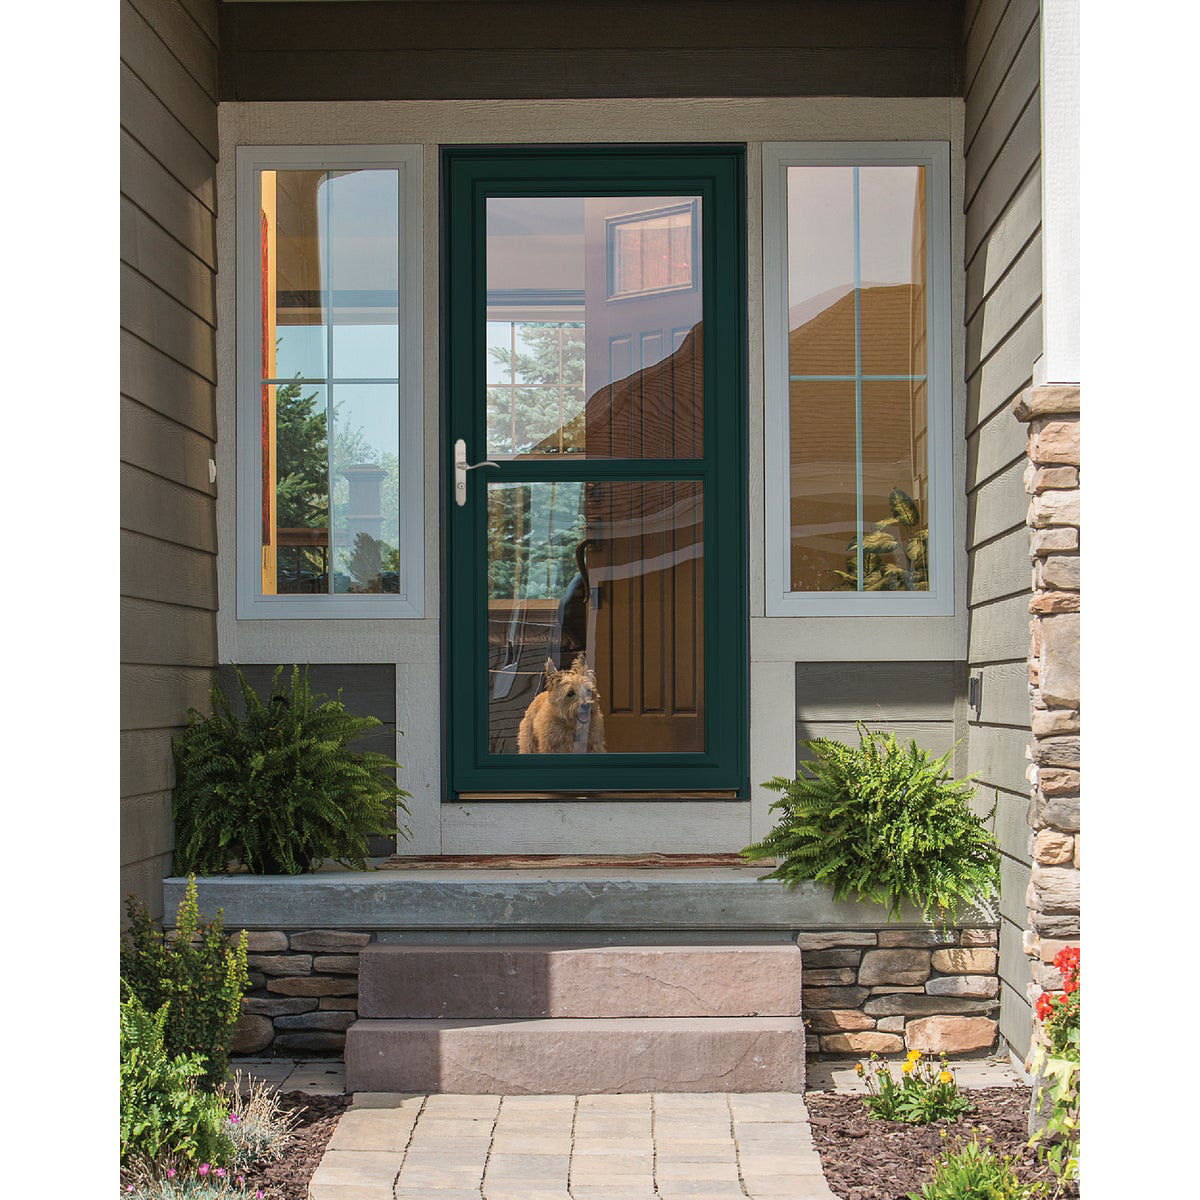 Measuring for a Larson Storm Door – Reeb Learning Center